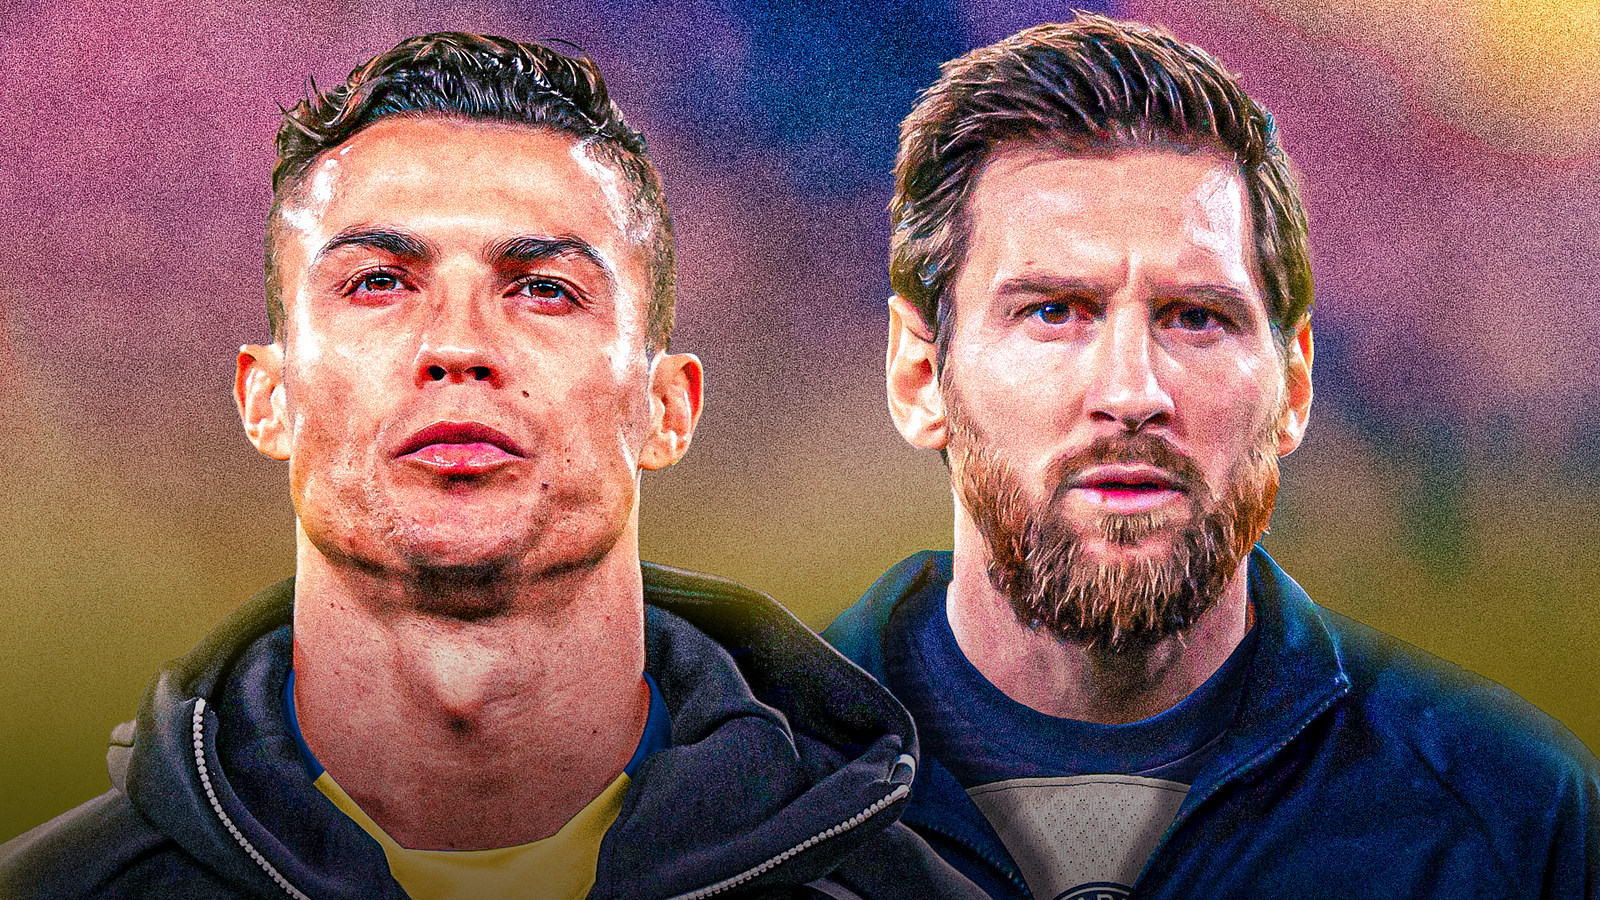 Lionel Messi and Cristiano Ronaldo take part in photoshoot together